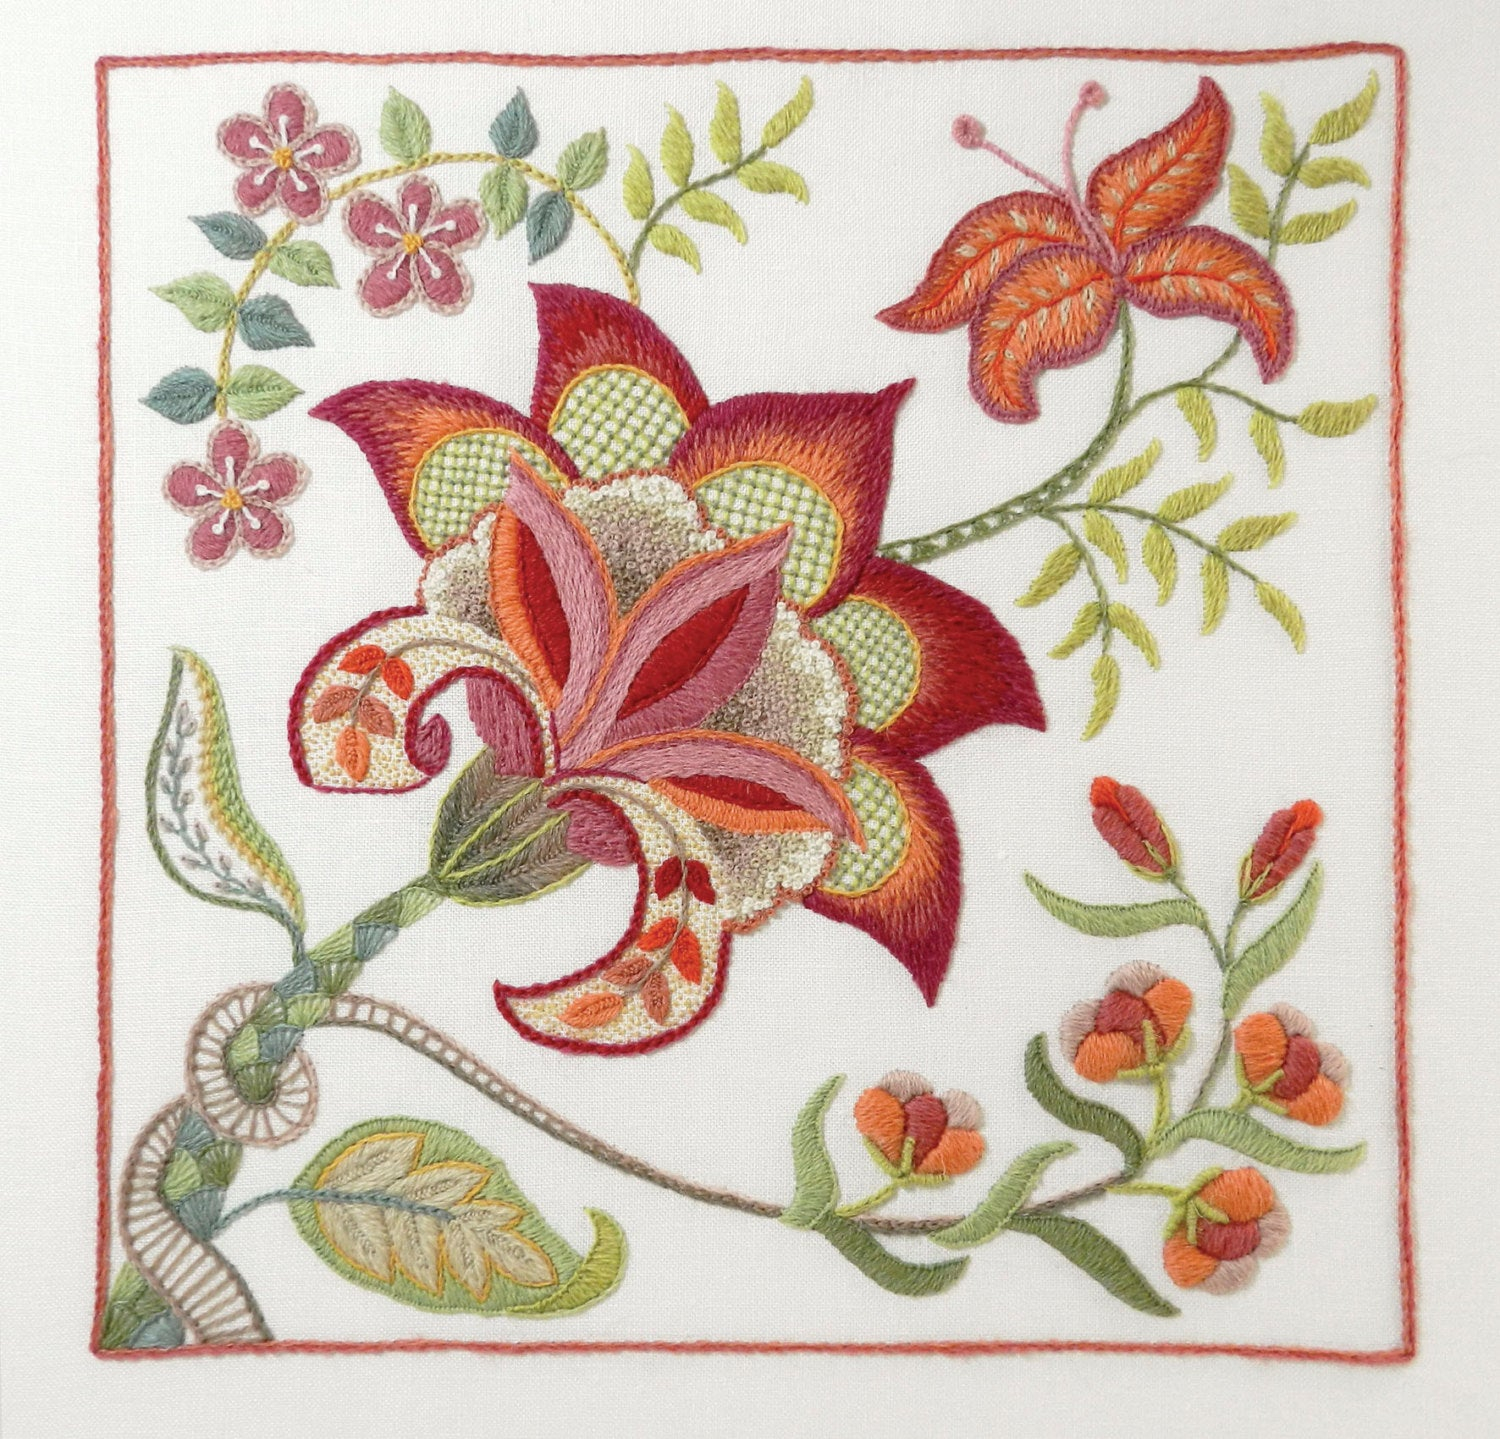 Crewel Embroidery Patterns Crewel Embroidery Kit Scarlet Glory